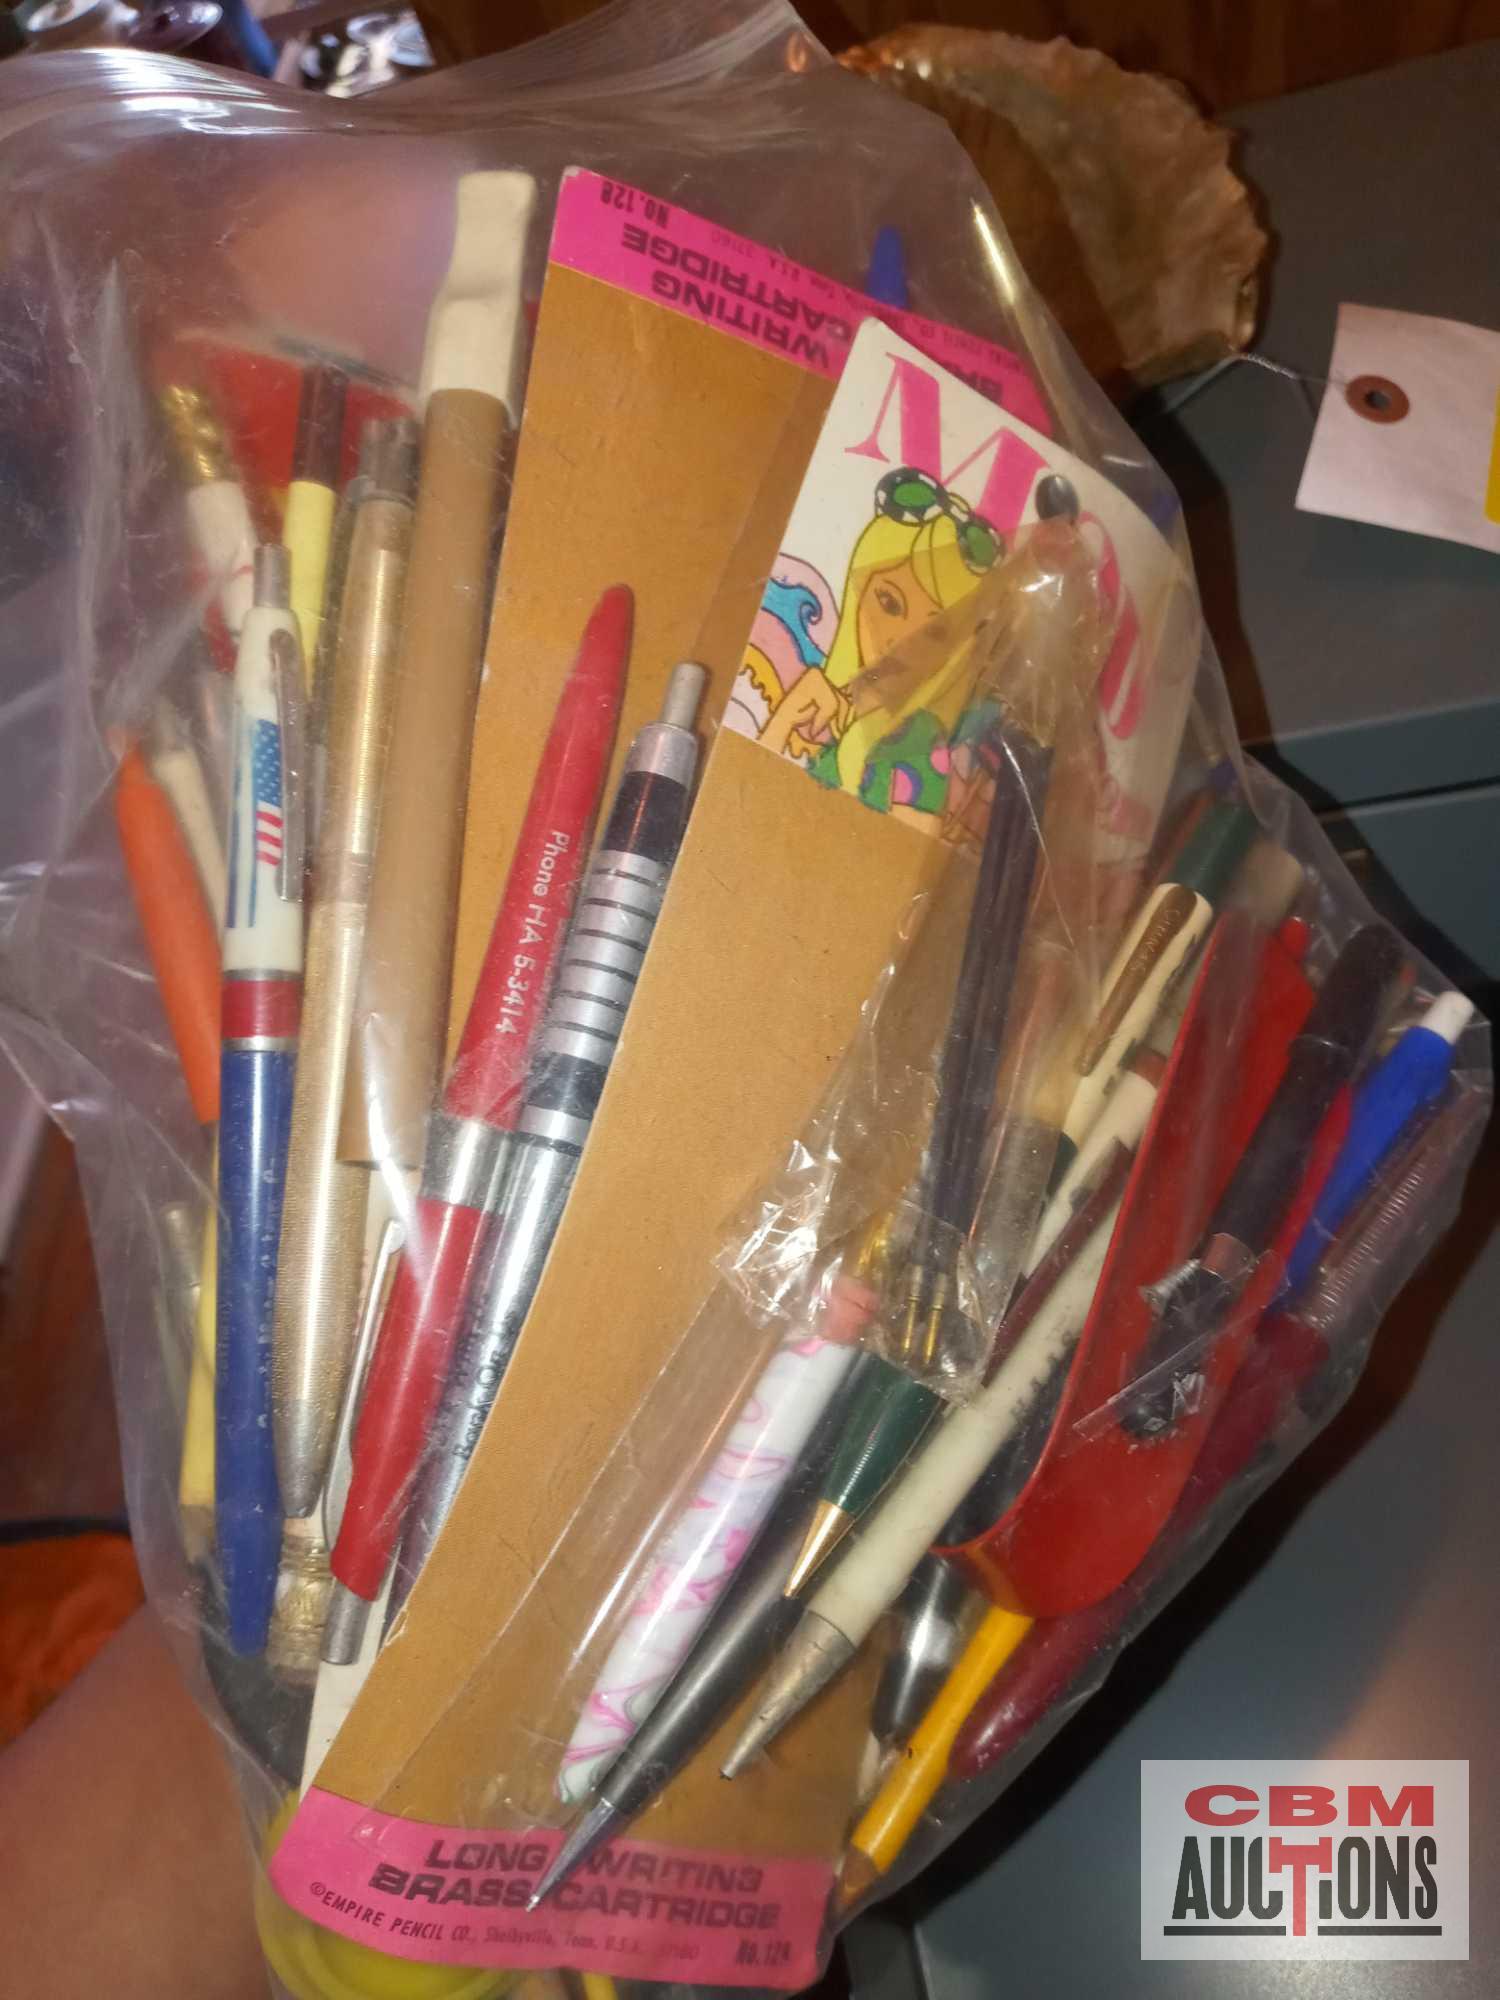 Metal cabinet, assorted pens, decorative tape, staplers and staples, and large shell